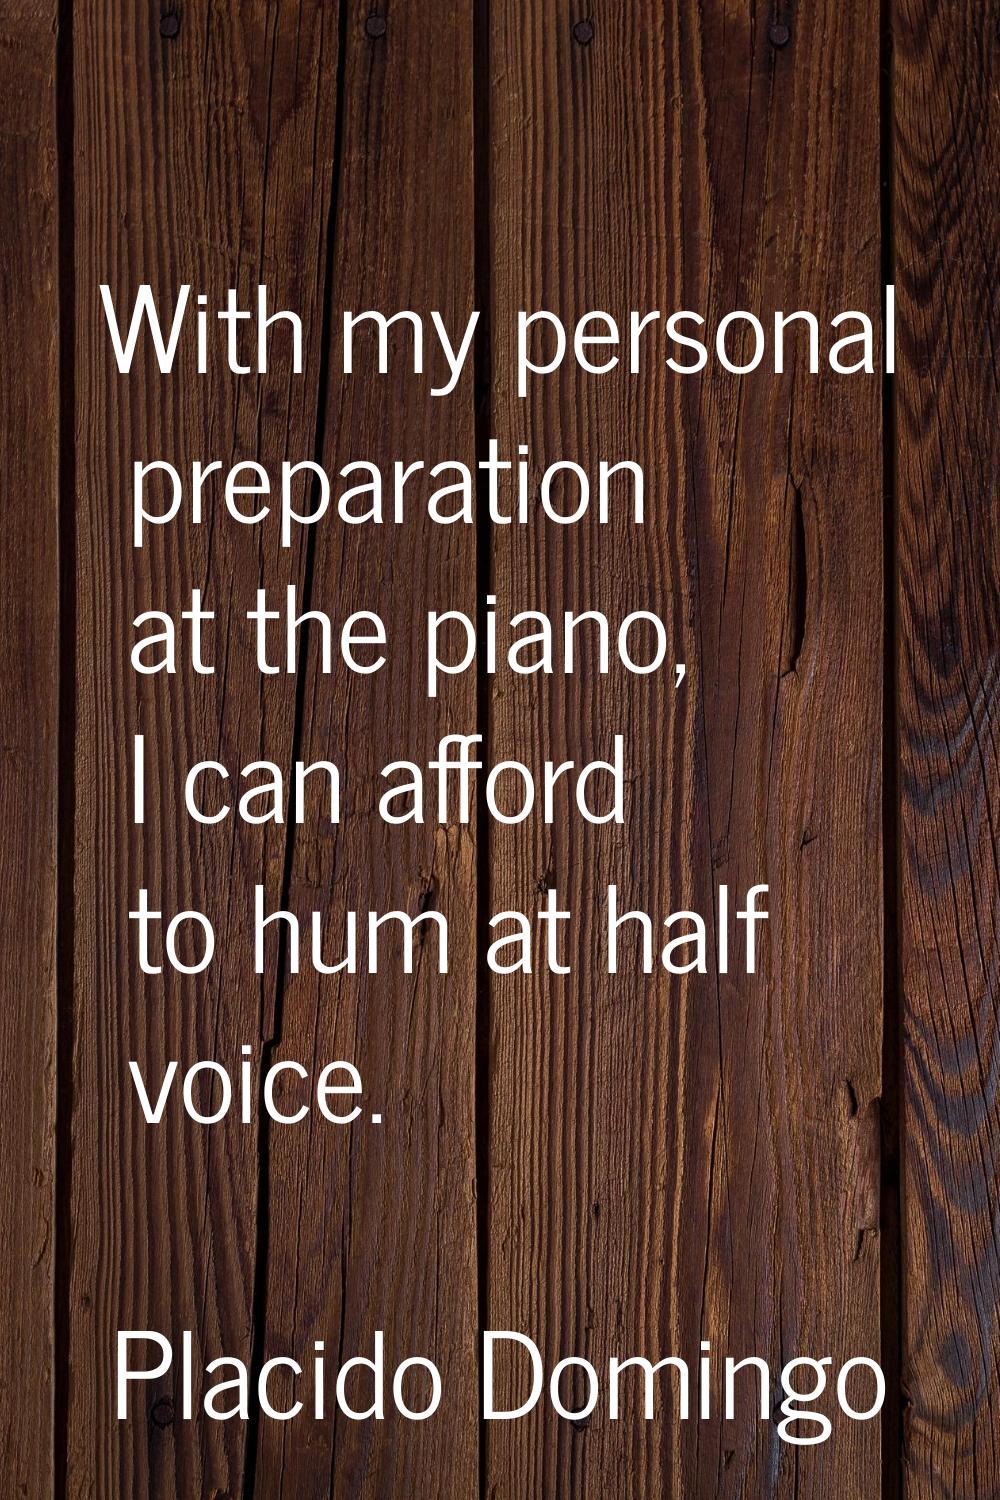 With my personal preparation at the piano, I can afford to hum at half voice.